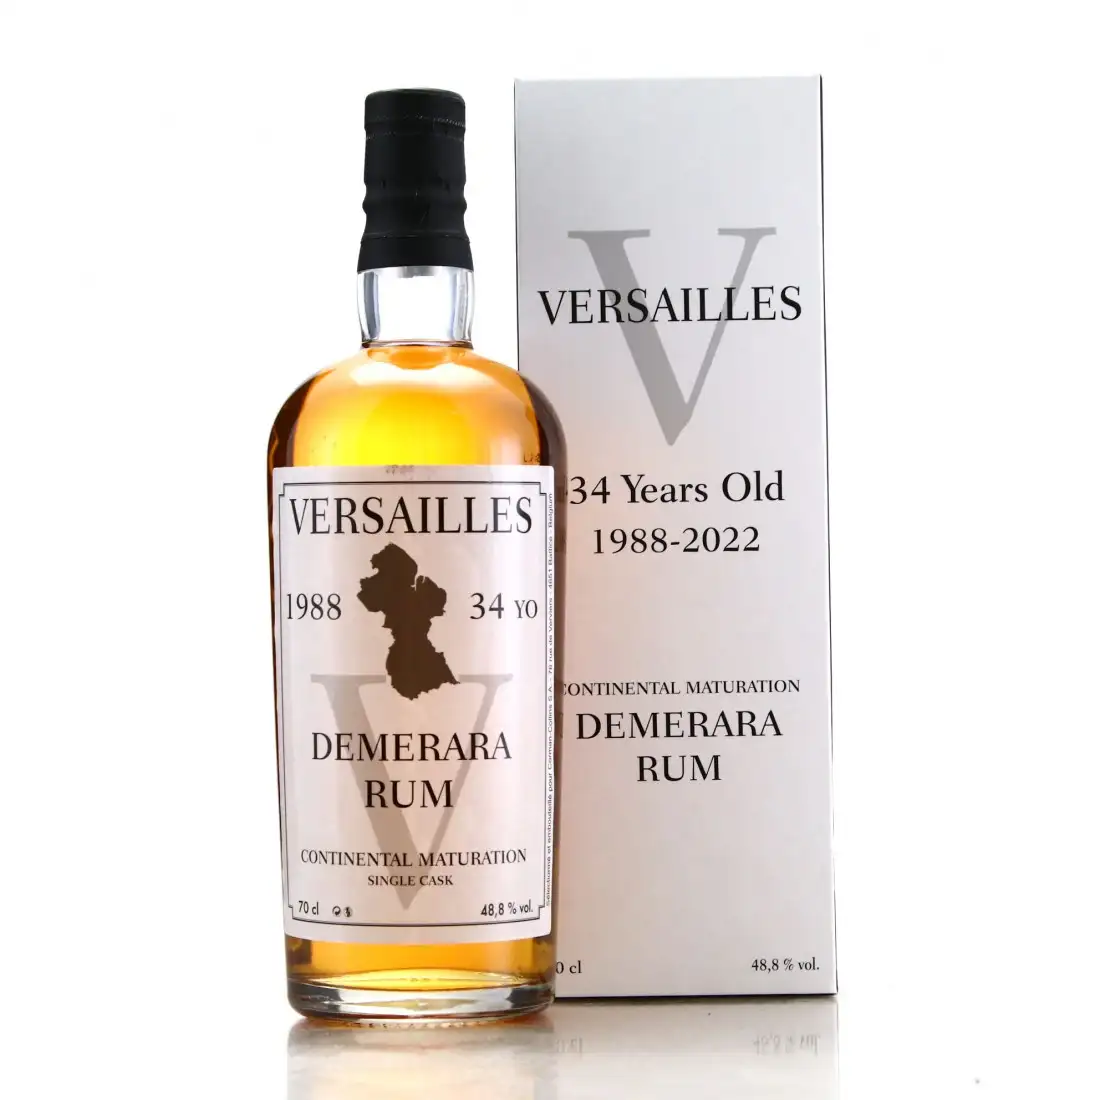 Image of the front of the bottle of the rum Demerara Rum V VSG